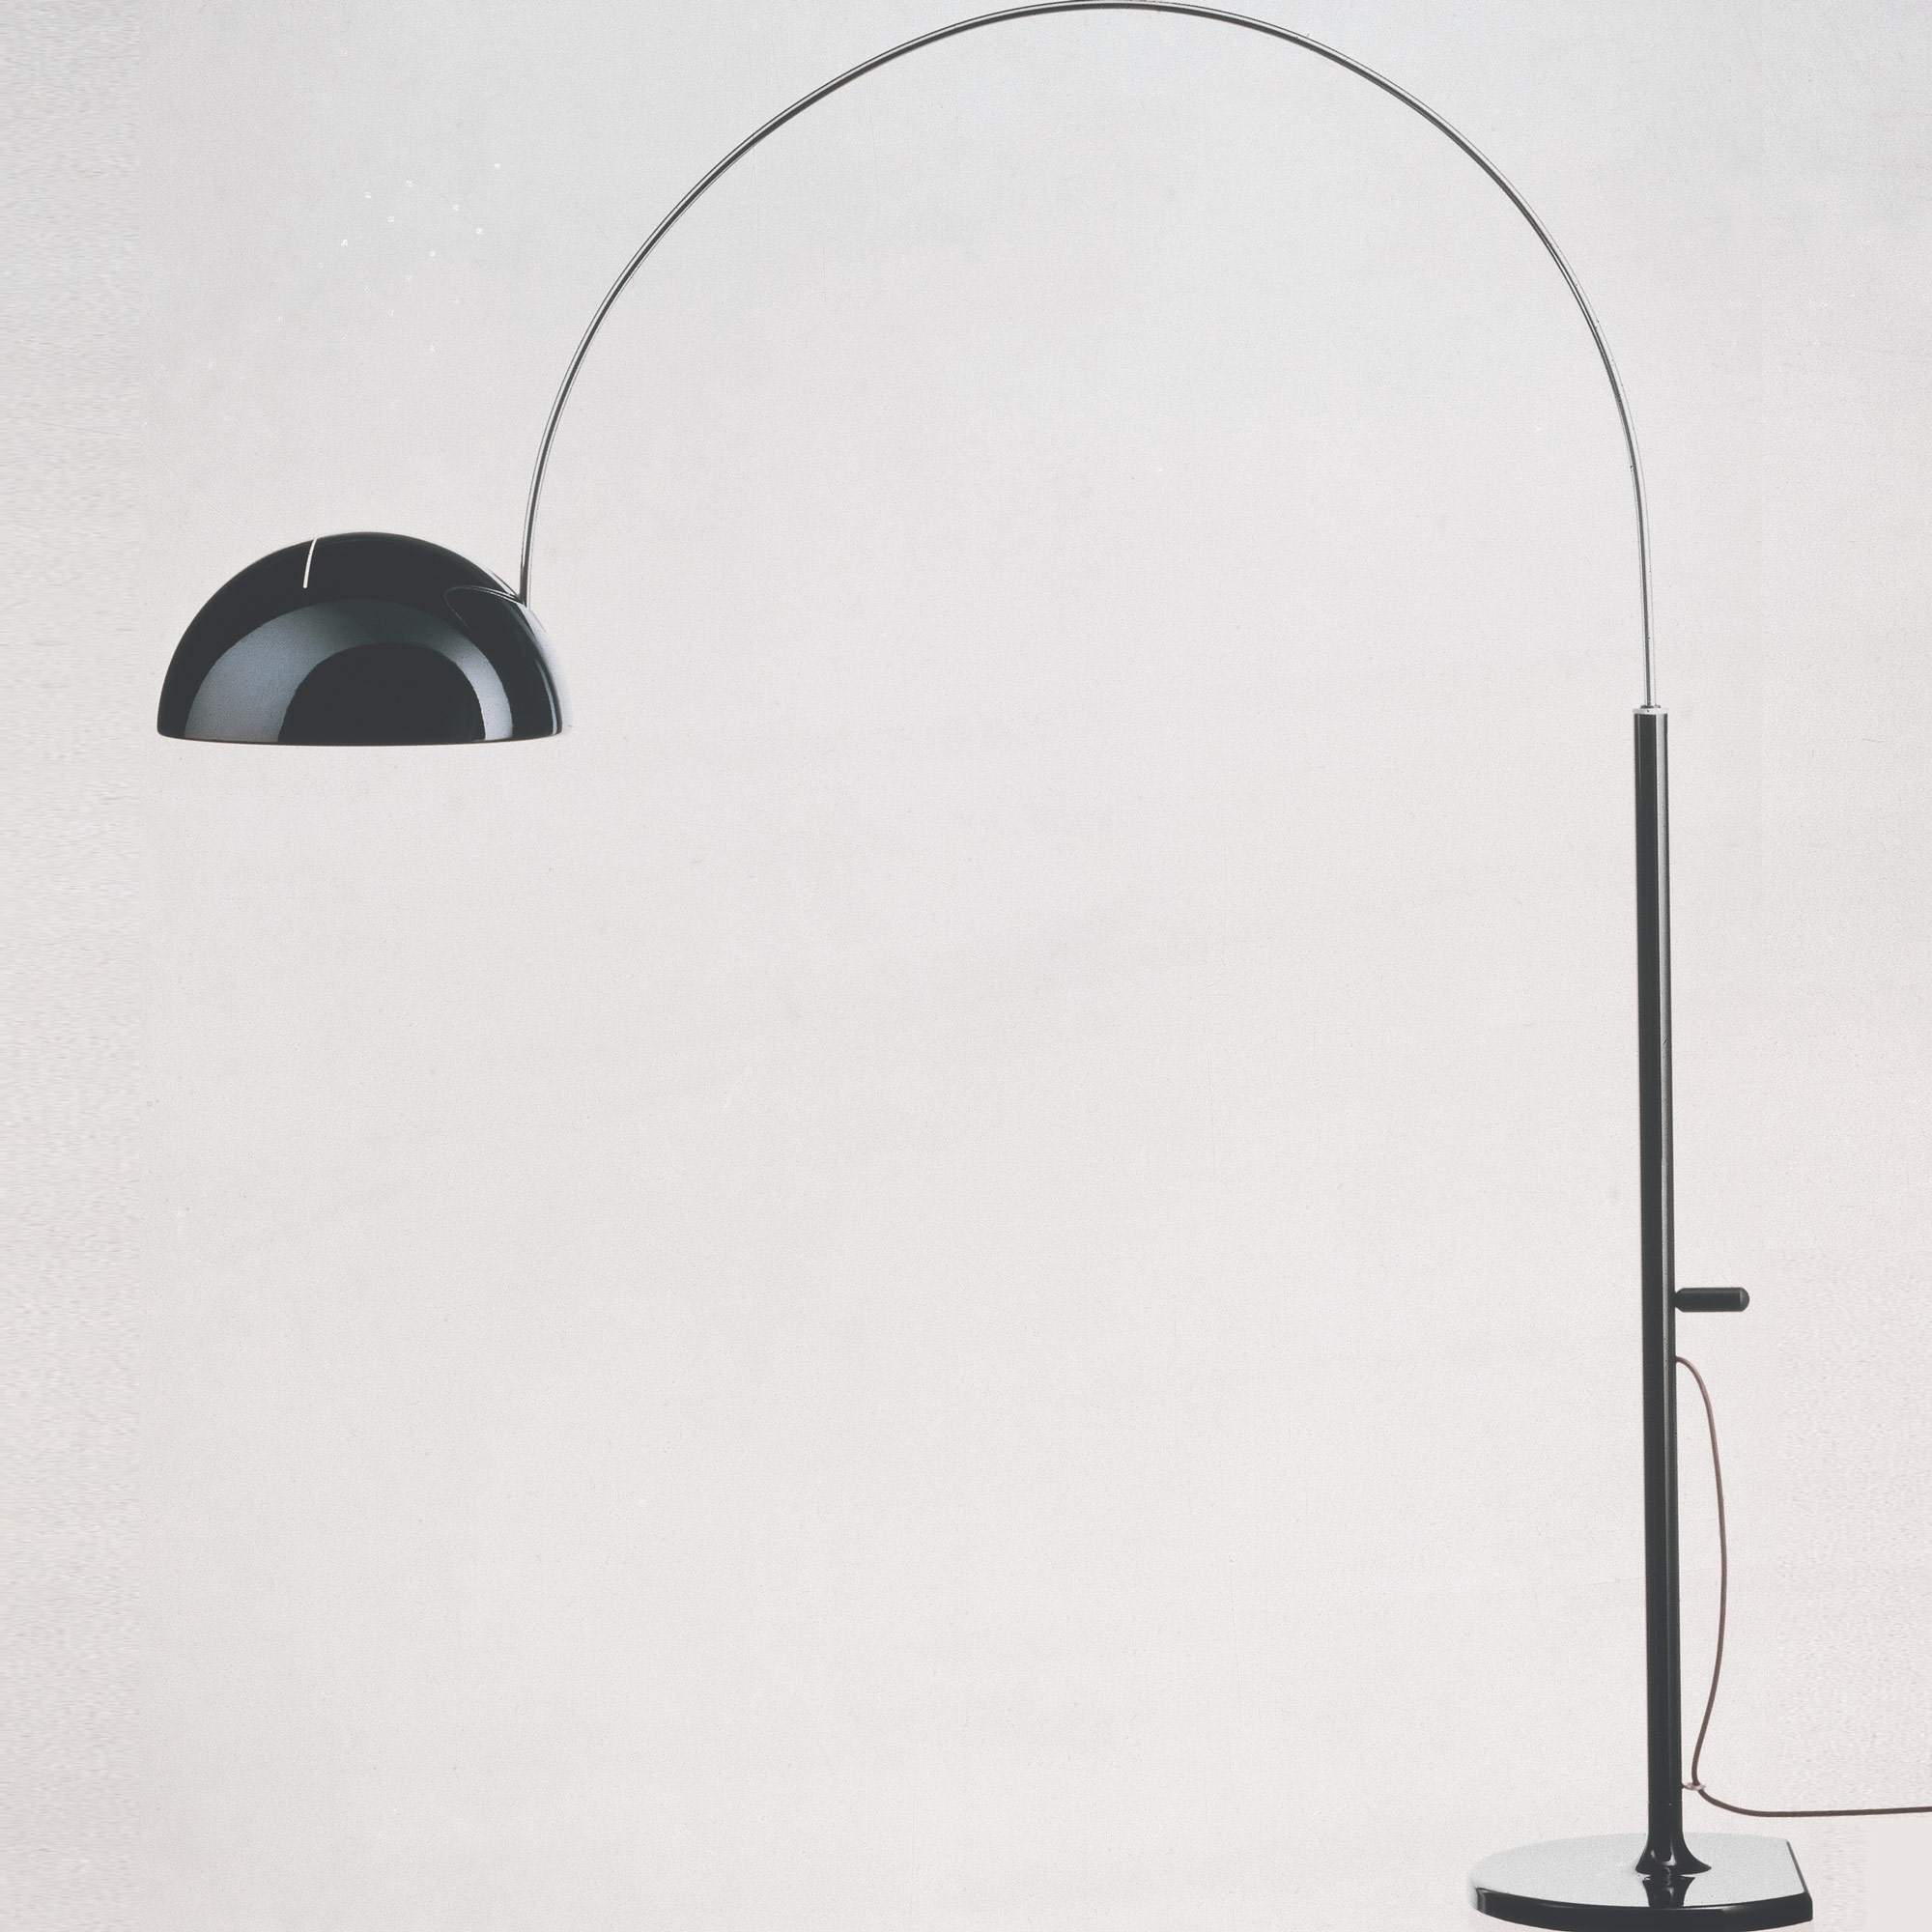 Lamp | by Srl Oluce OL-COUPE-3320R-BL OLC156026 Floor Arc | Coupe